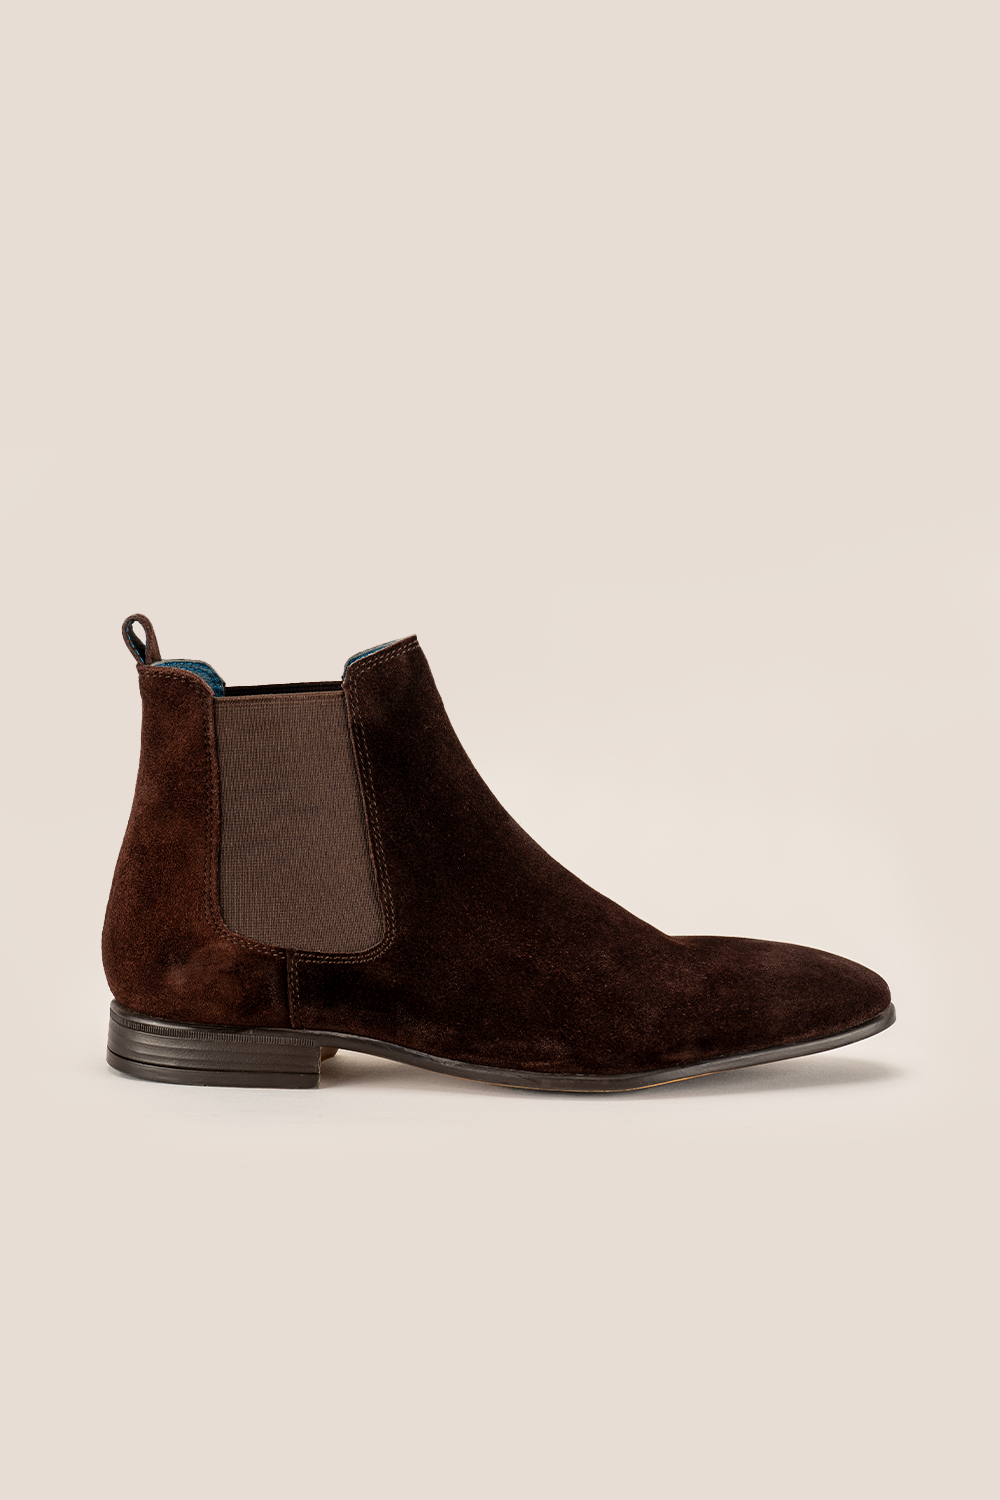 Oswin Hyde Darwin  Brown suede boots for Men